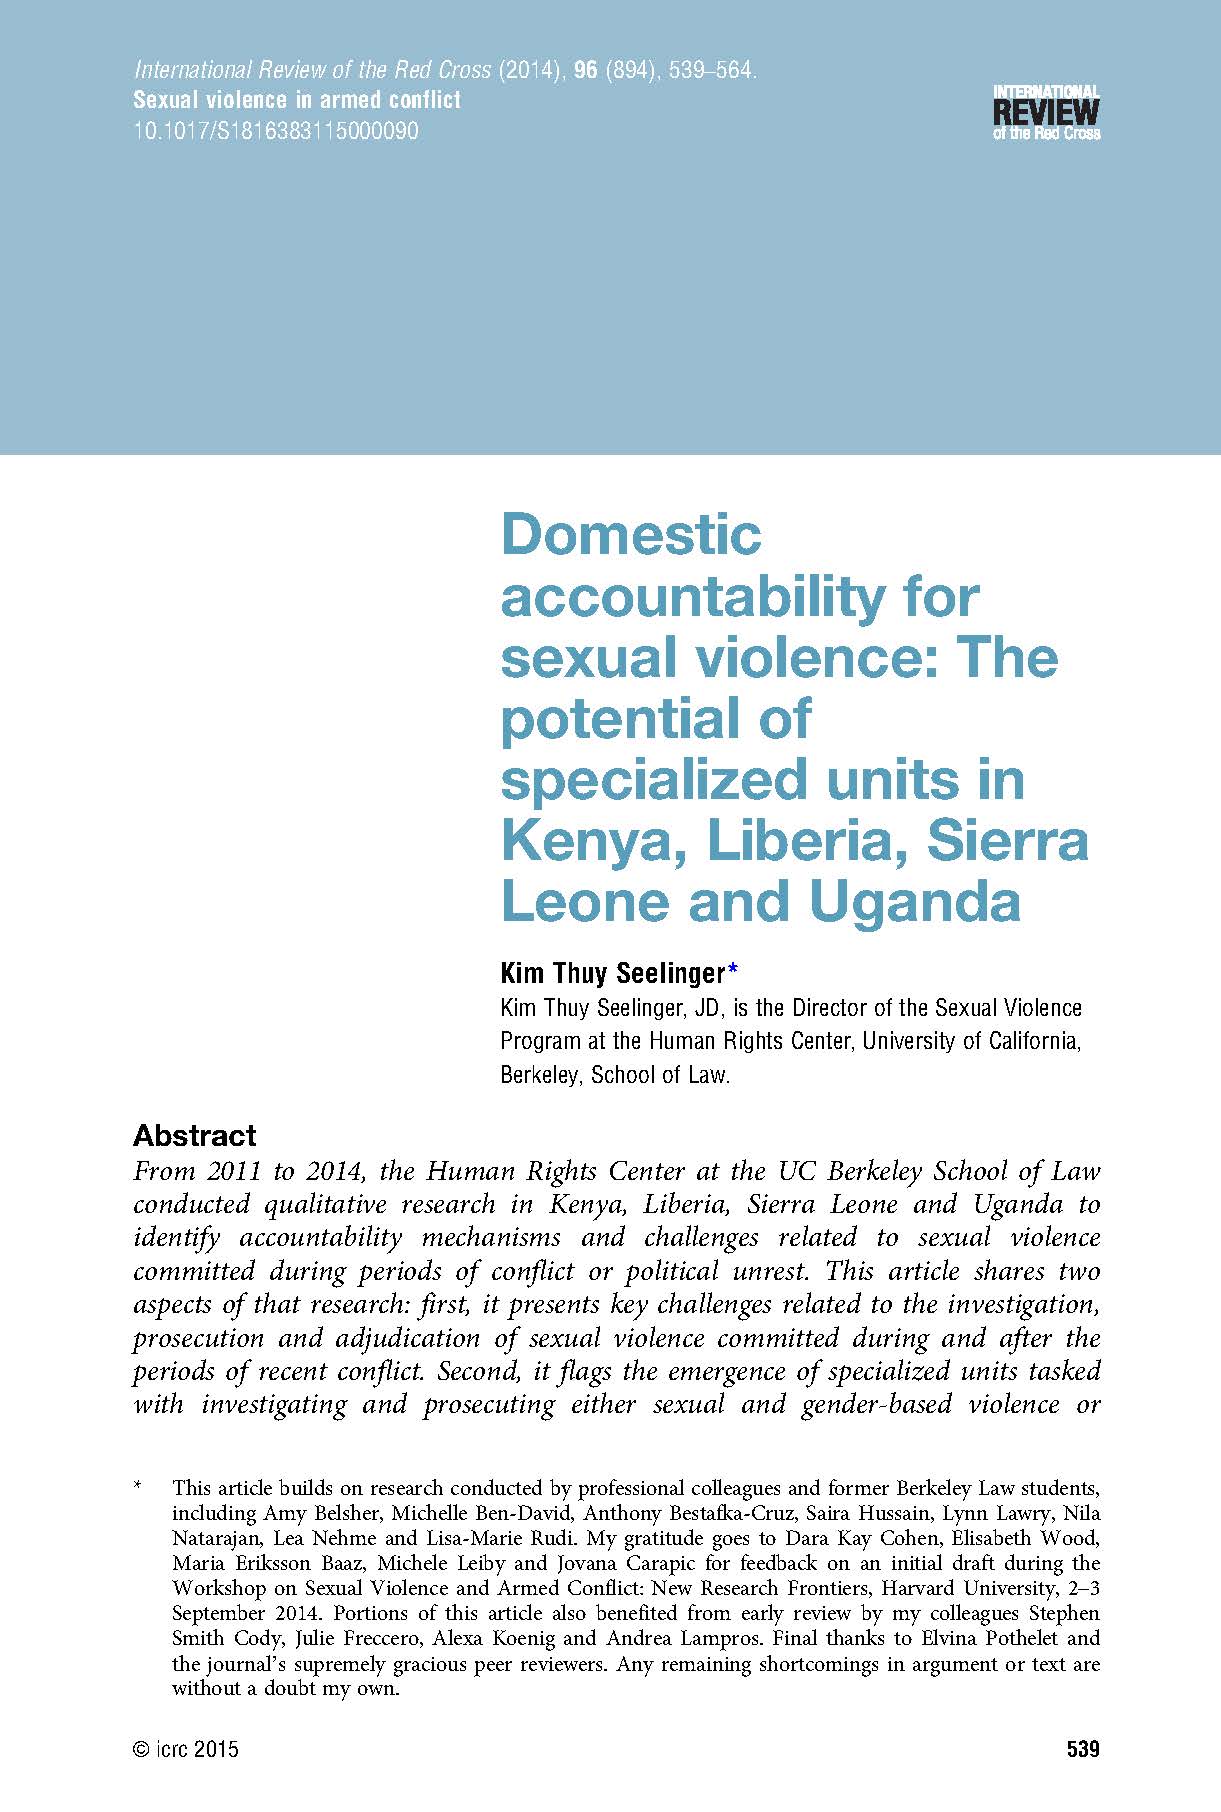 Domestic accountability for sexual violence- The potential of specialized units in Kenya, Liberia, Sierra Leone and Uganda